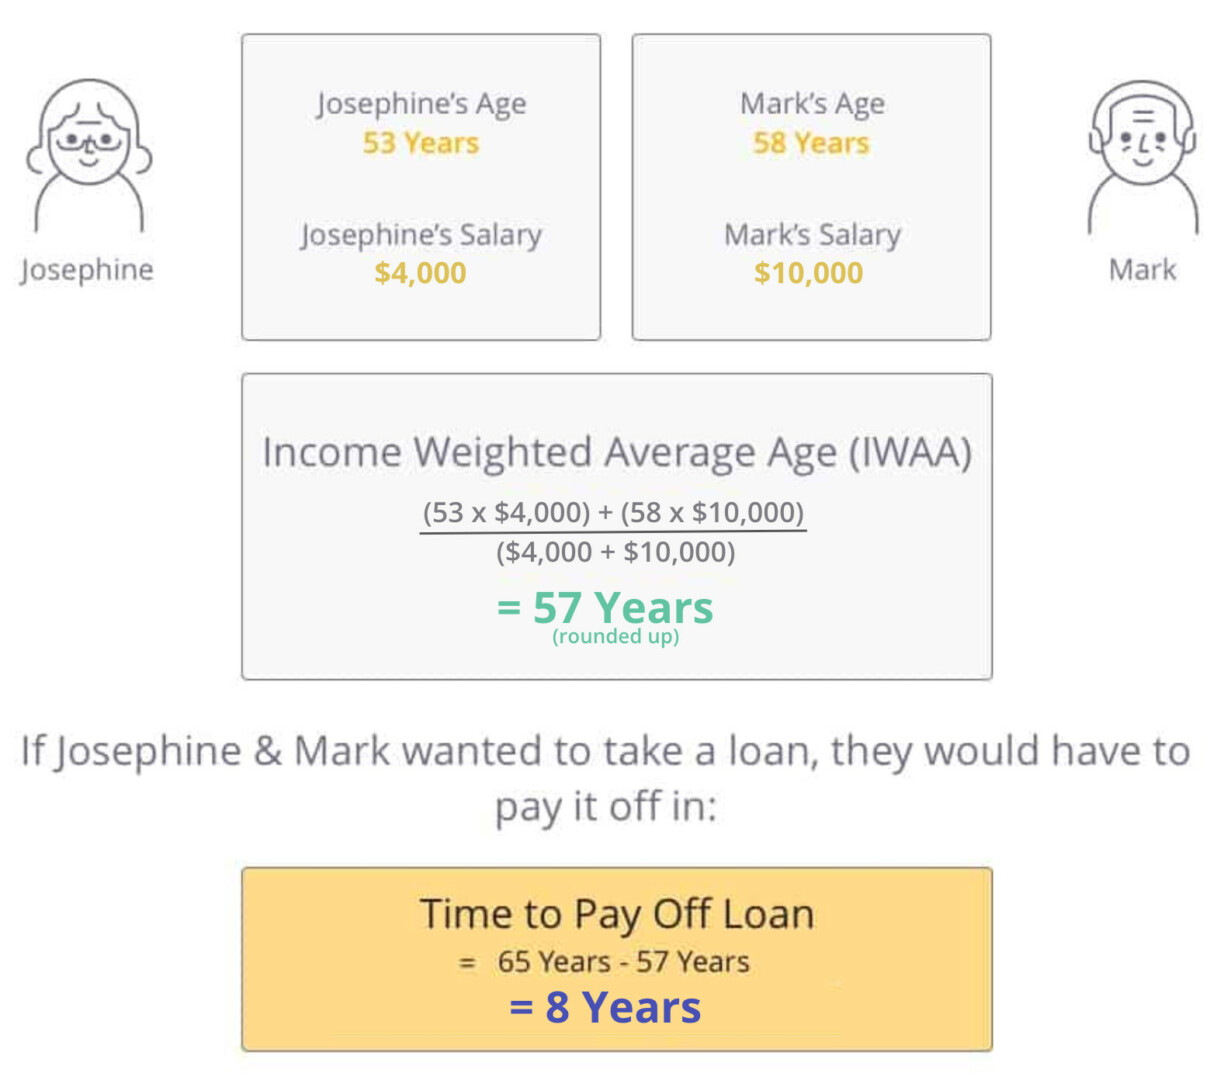 Calculating the Income Weighted Average Age (IWAA) for a couple to determine the time available to pay off their loan.